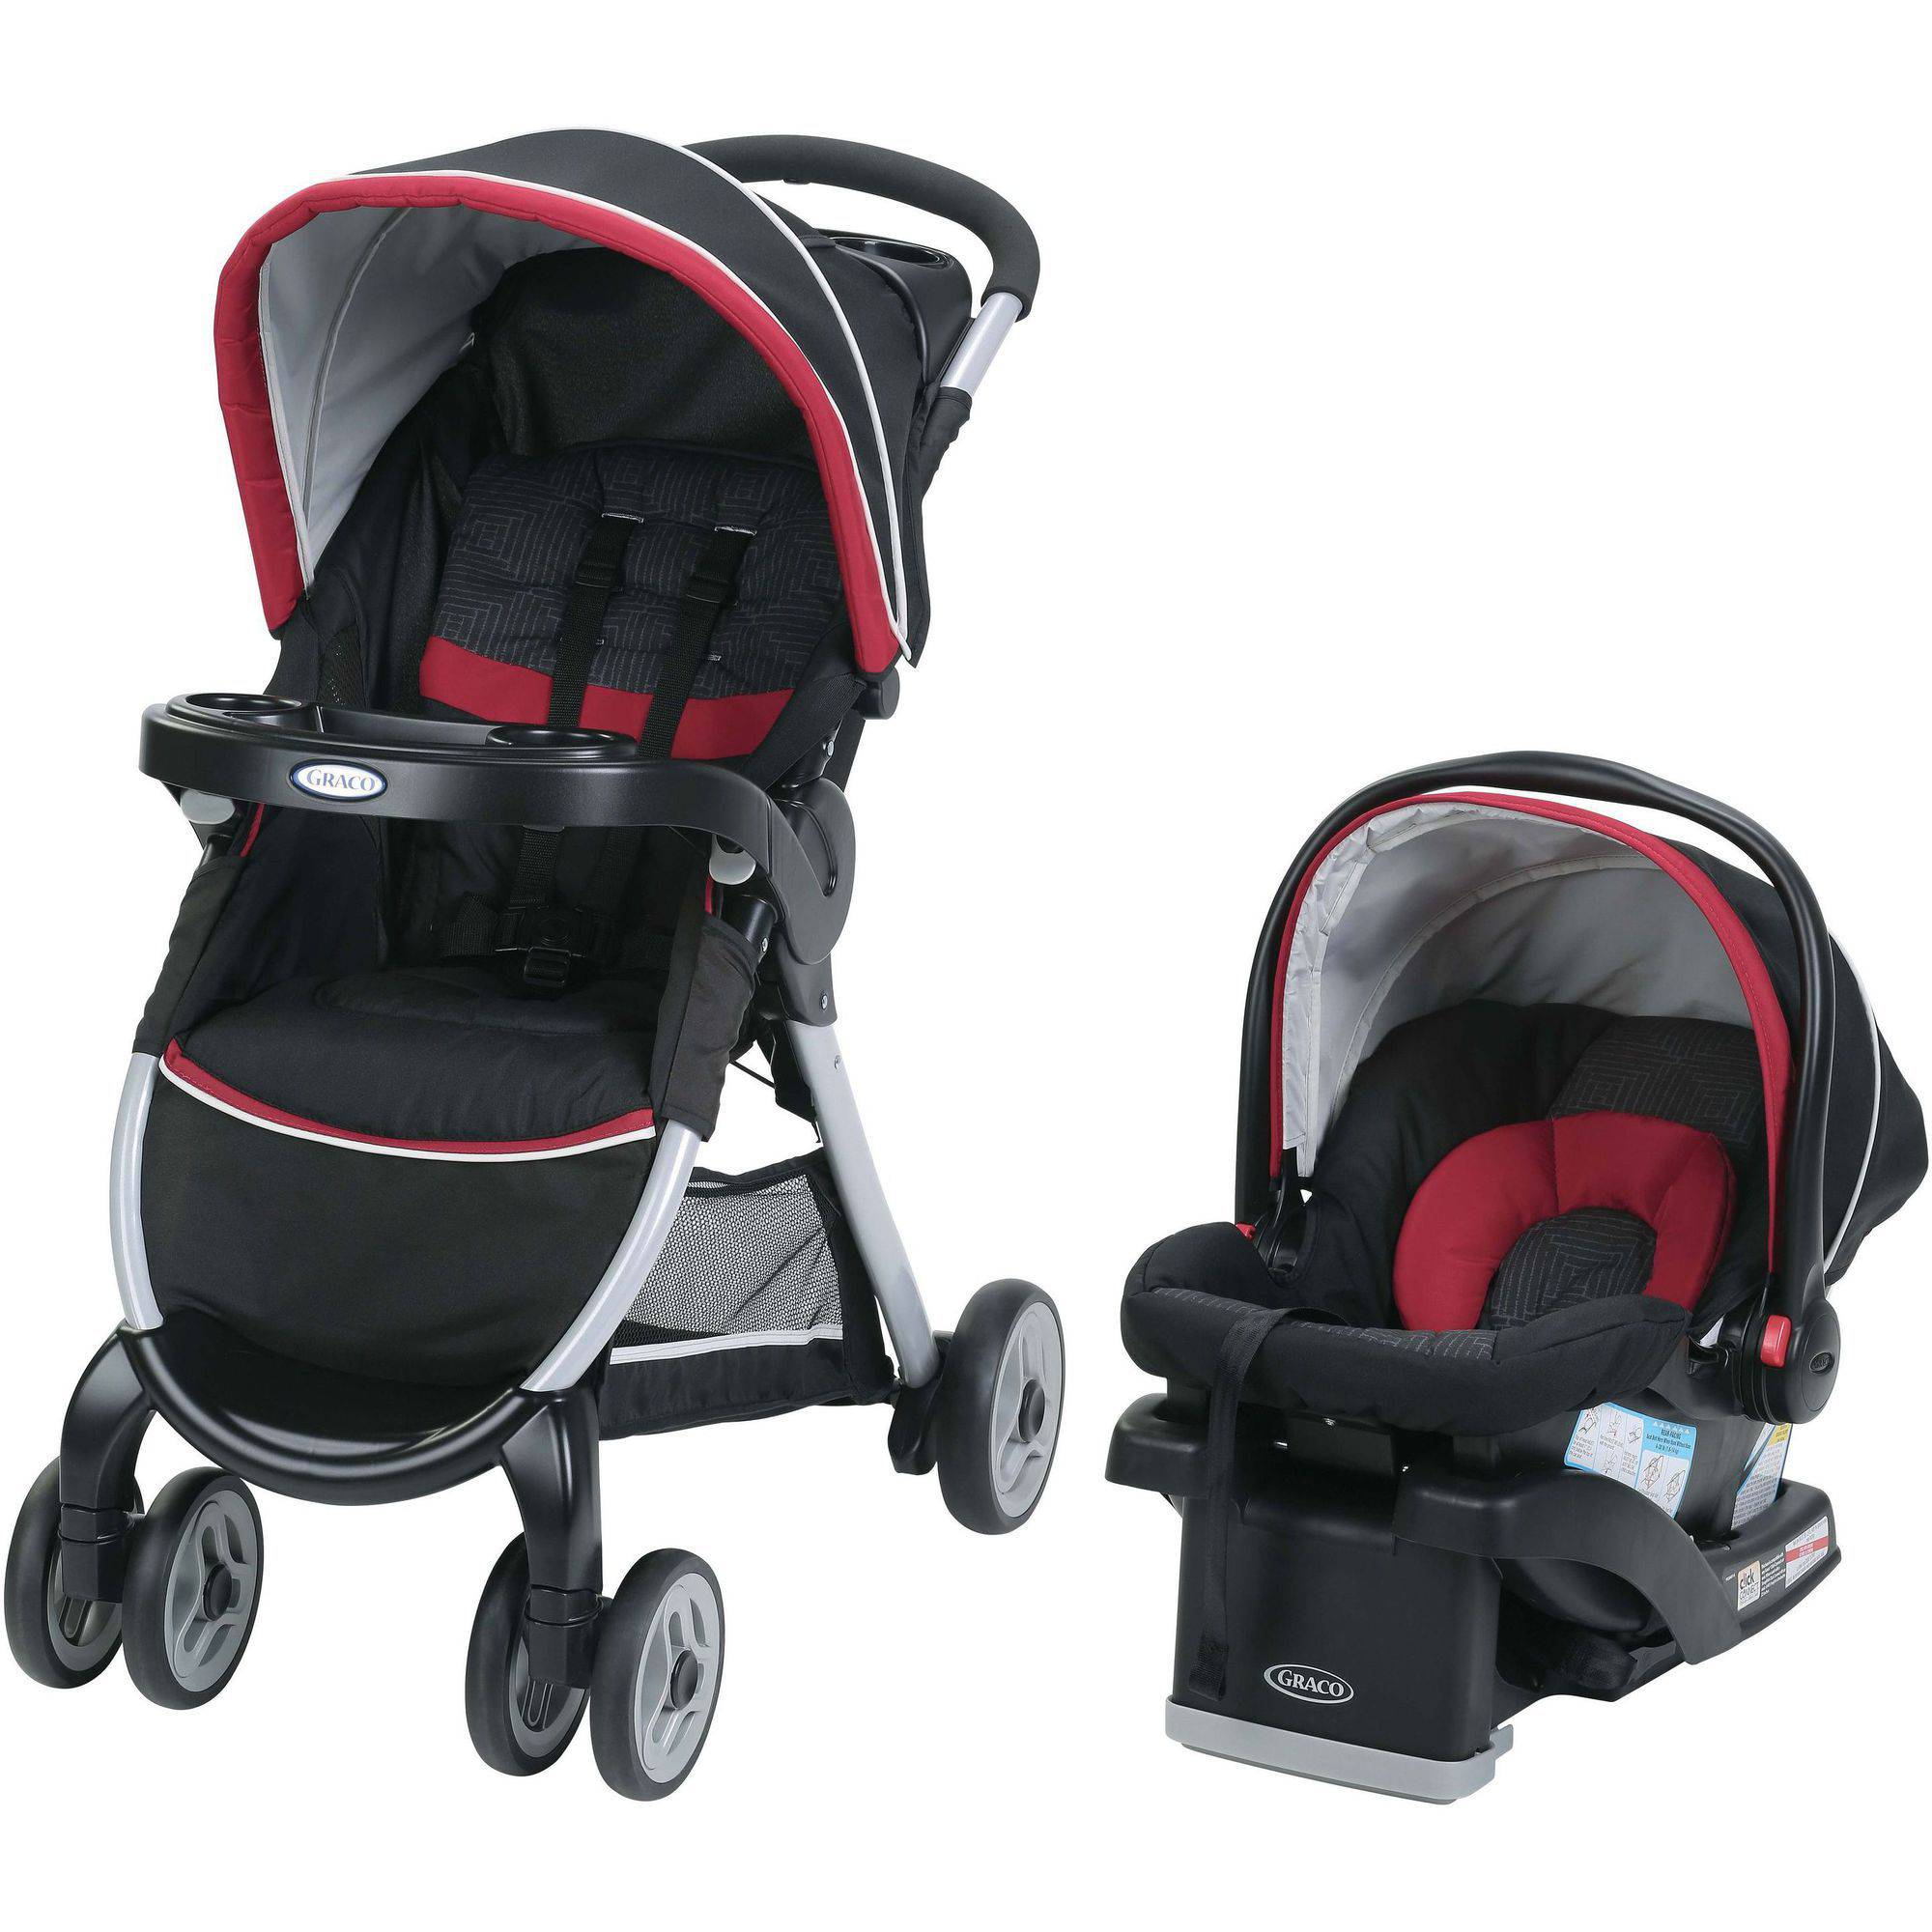 Graco FastAction Fold Click Connect Travel System $129.88